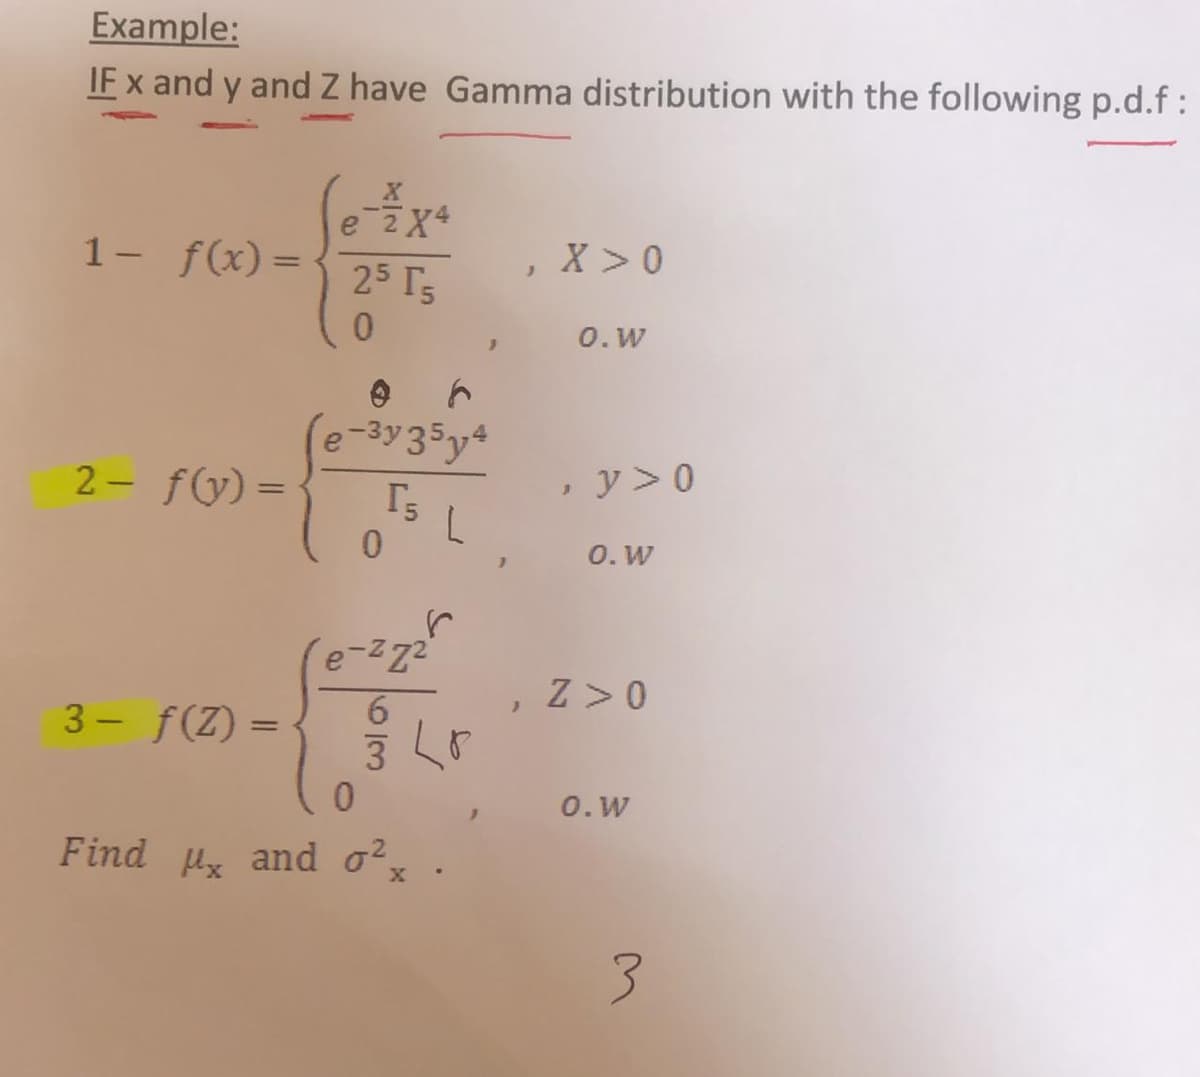 Example:
IF x and y and Z have Gamma distribution with the following p.d.f:
e zX4
1- f(x)=
X >0
|
25 Ts
0.W
e-3y35y4
2- f(y)=
y > 0
0. W
Z >0
3- f(Z) =
0. W
Find u and o?
